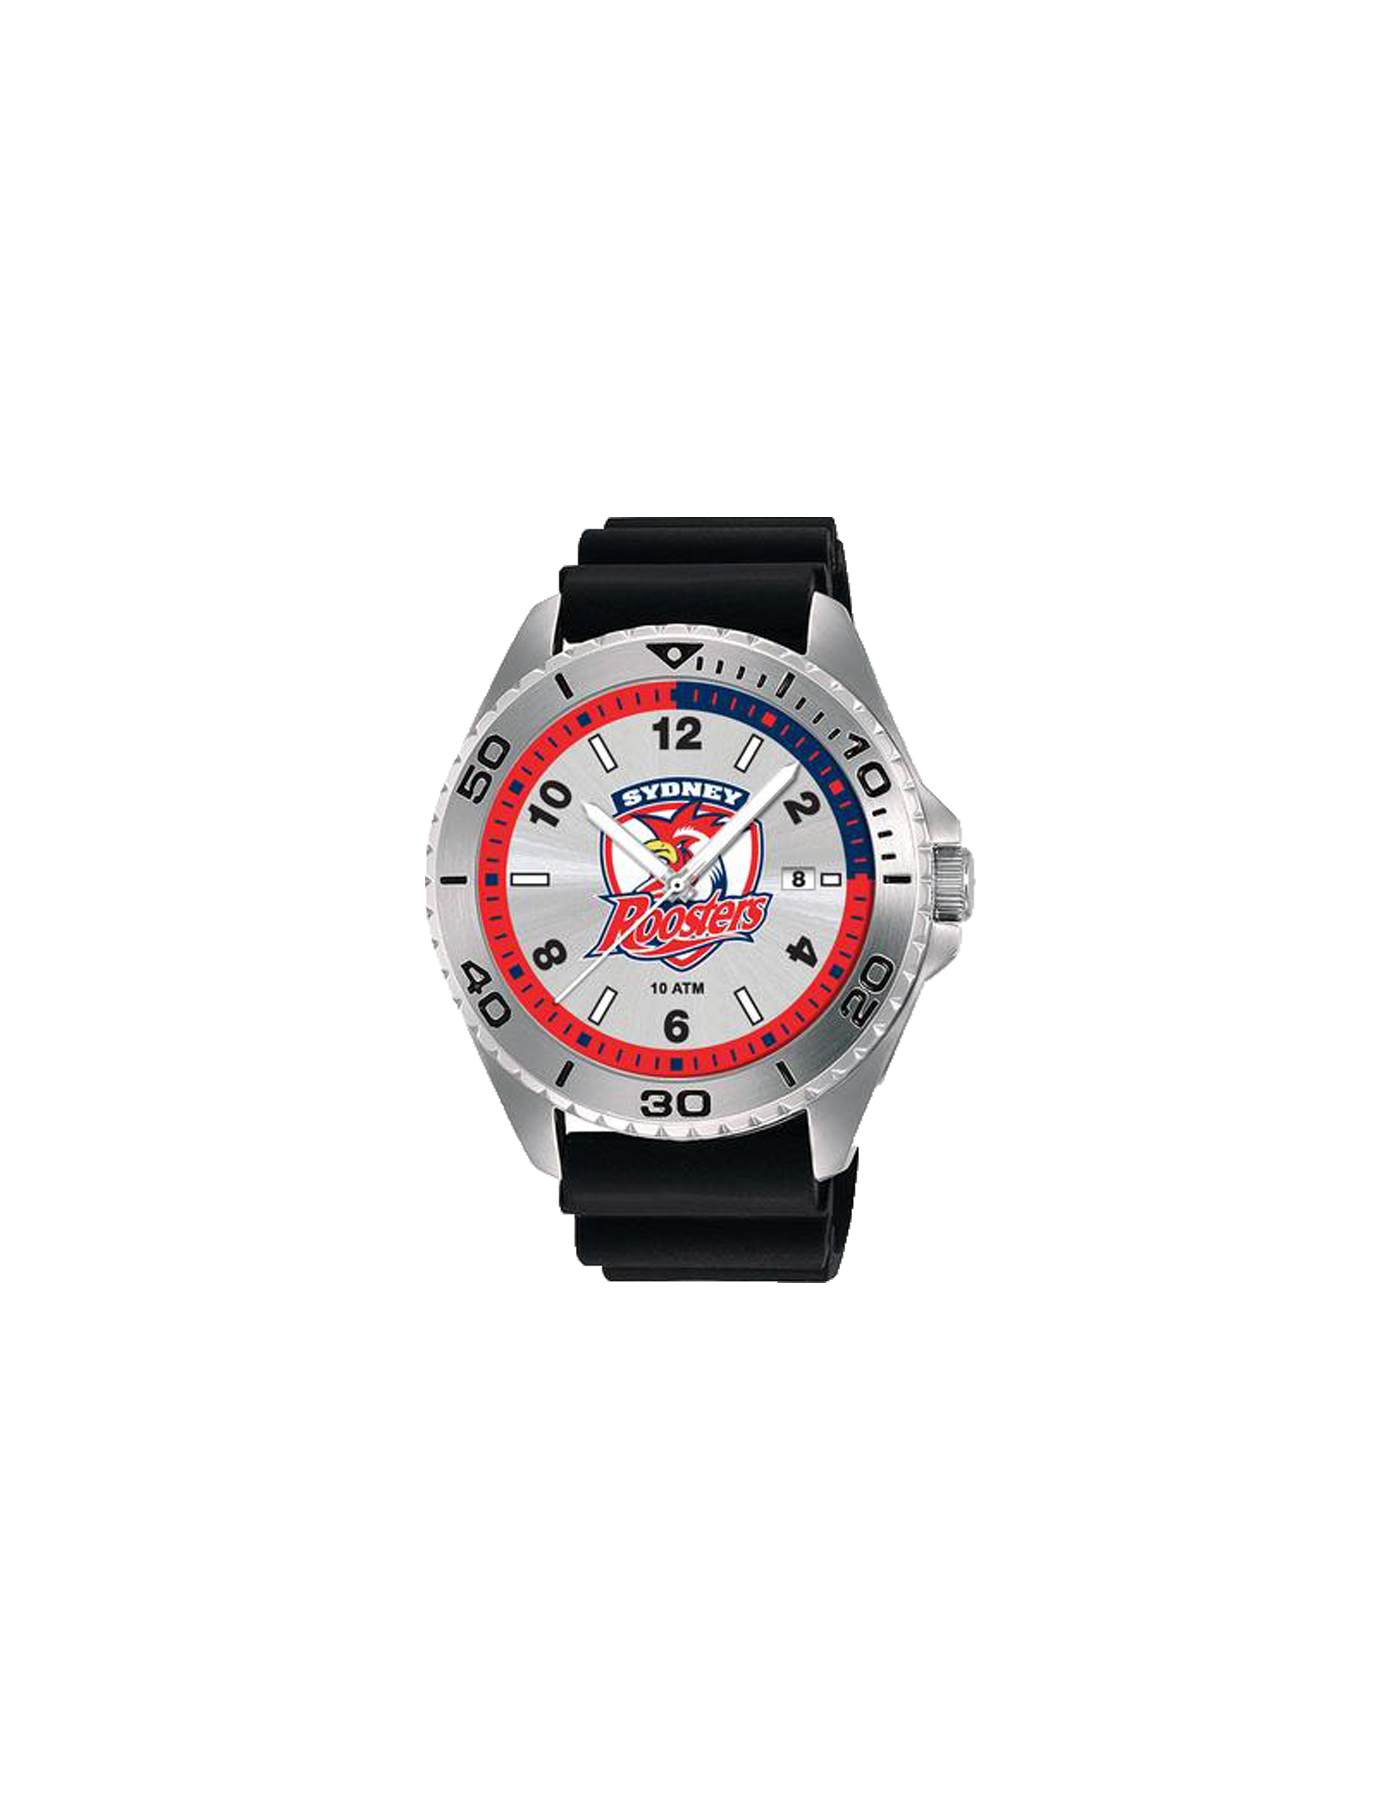 Sydney Roosters NRL try series watch